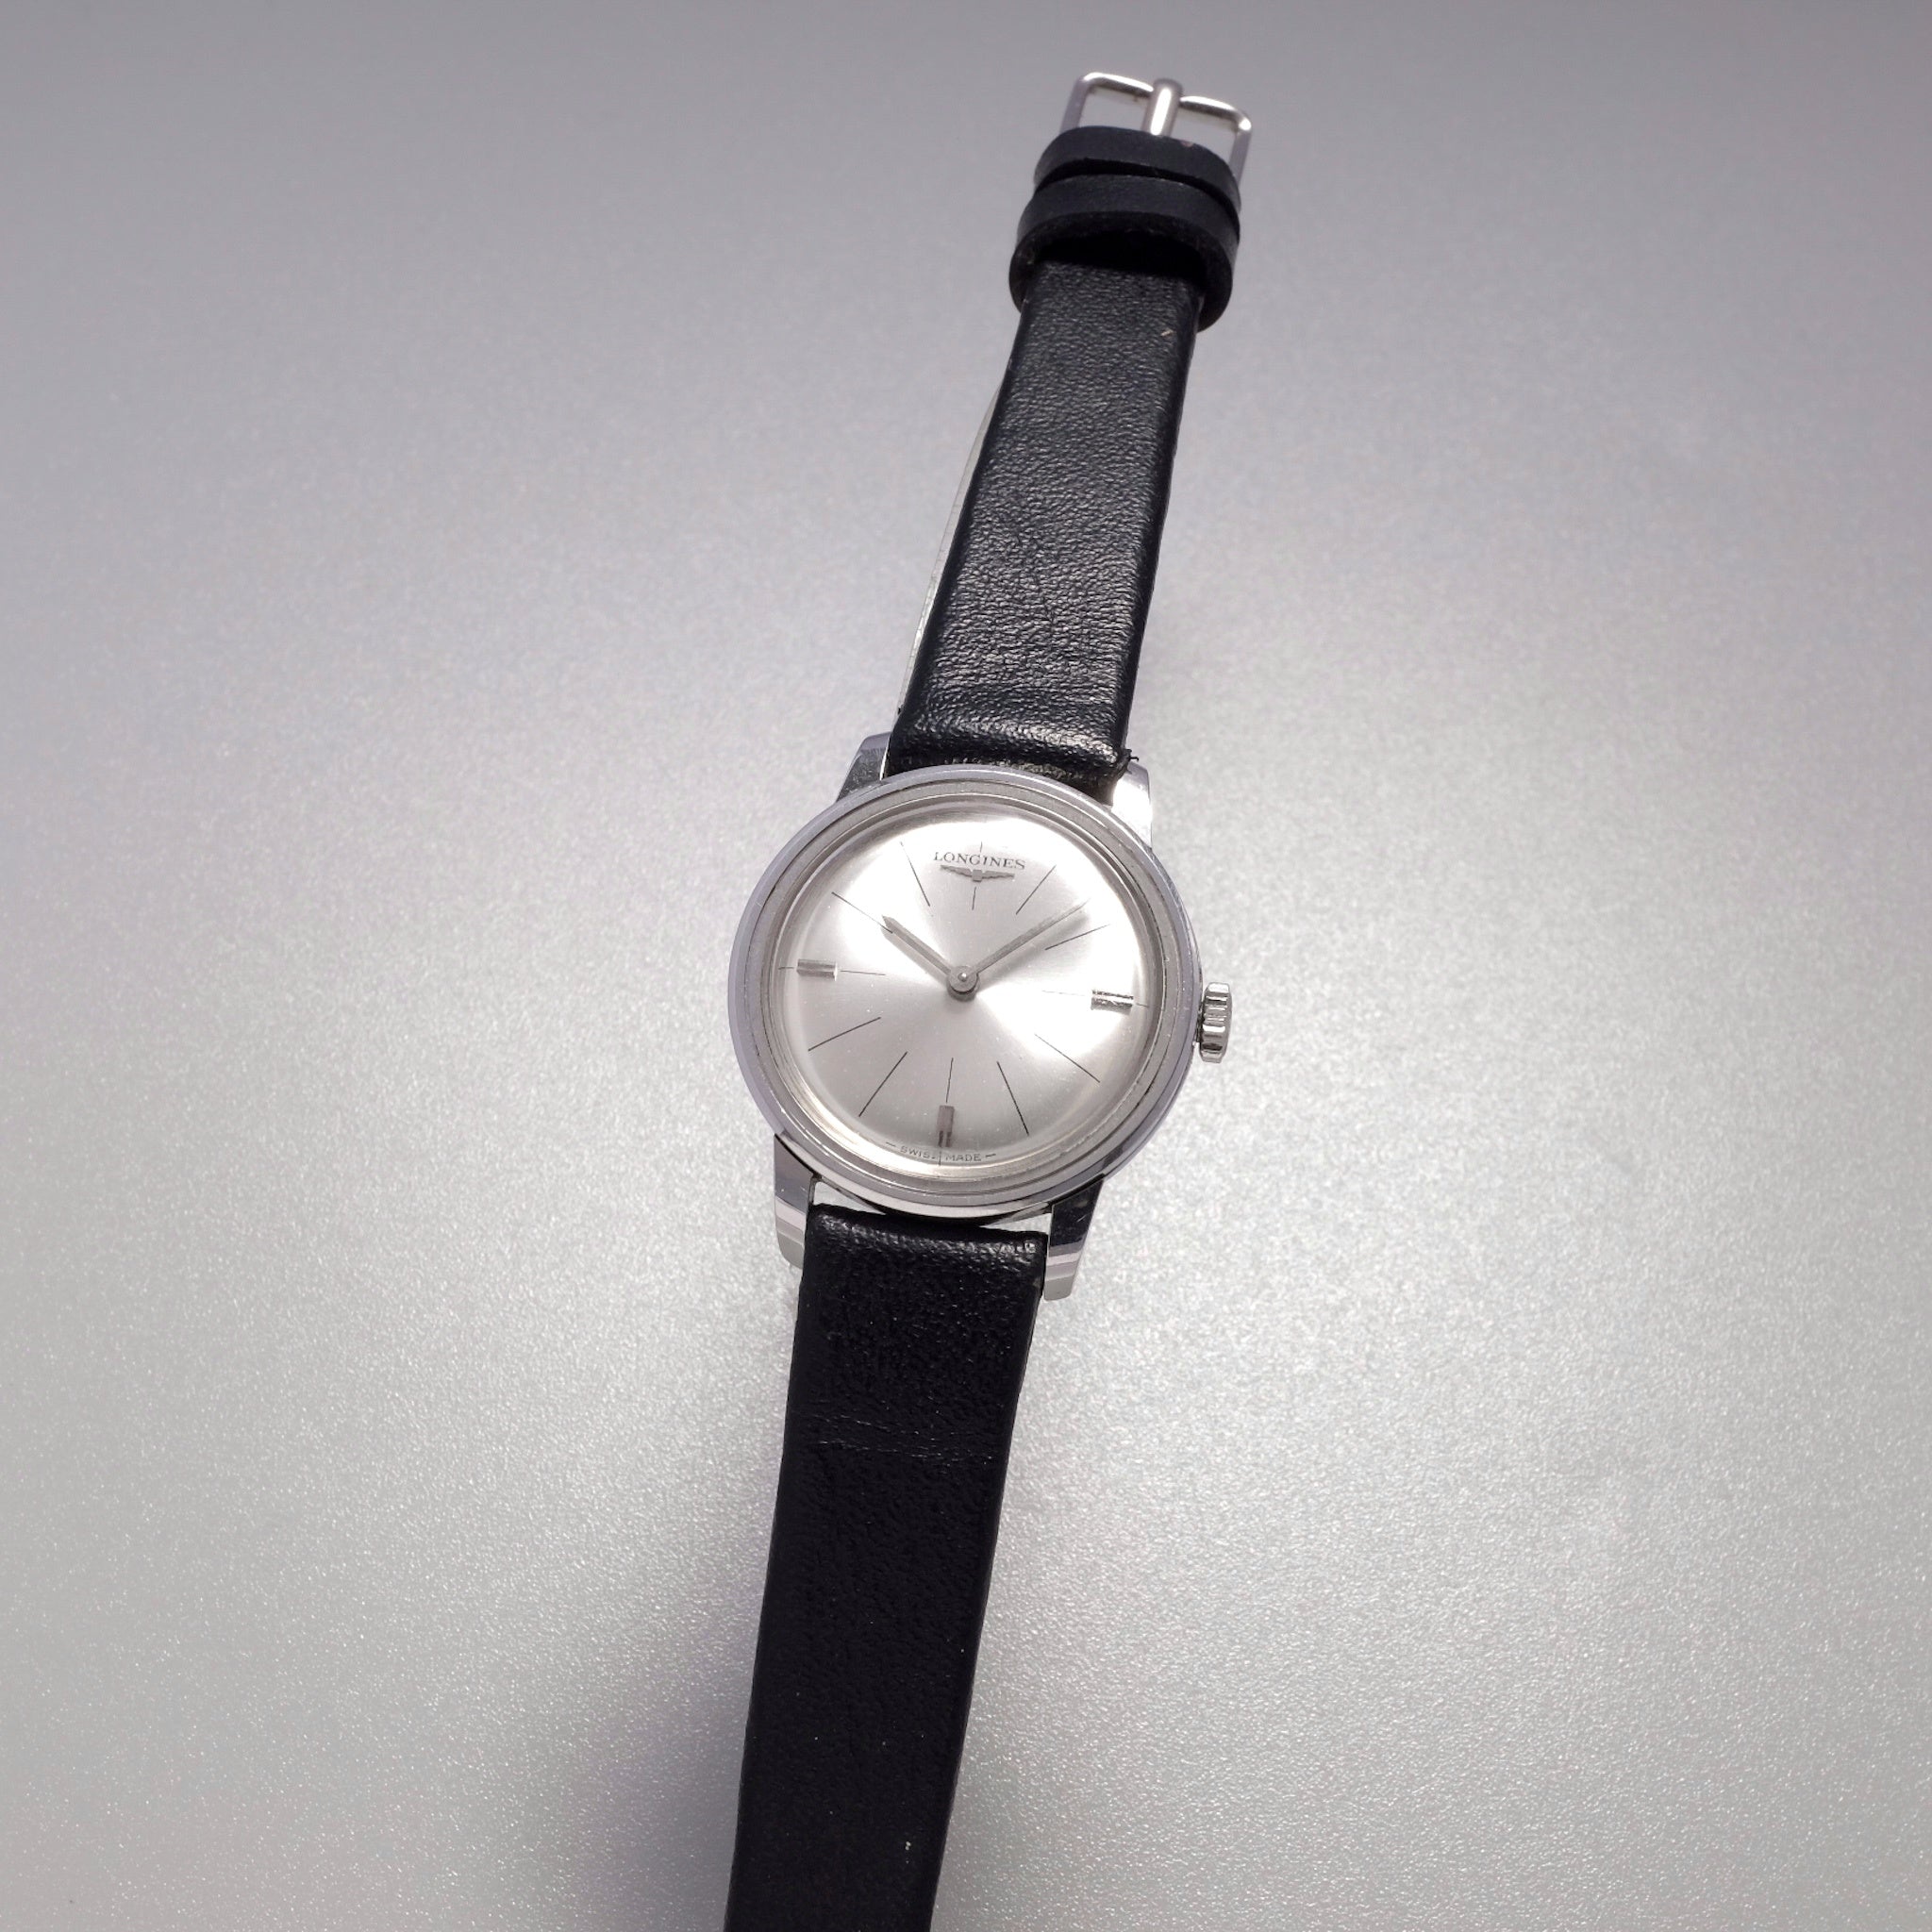 Longines 7643 from 1967